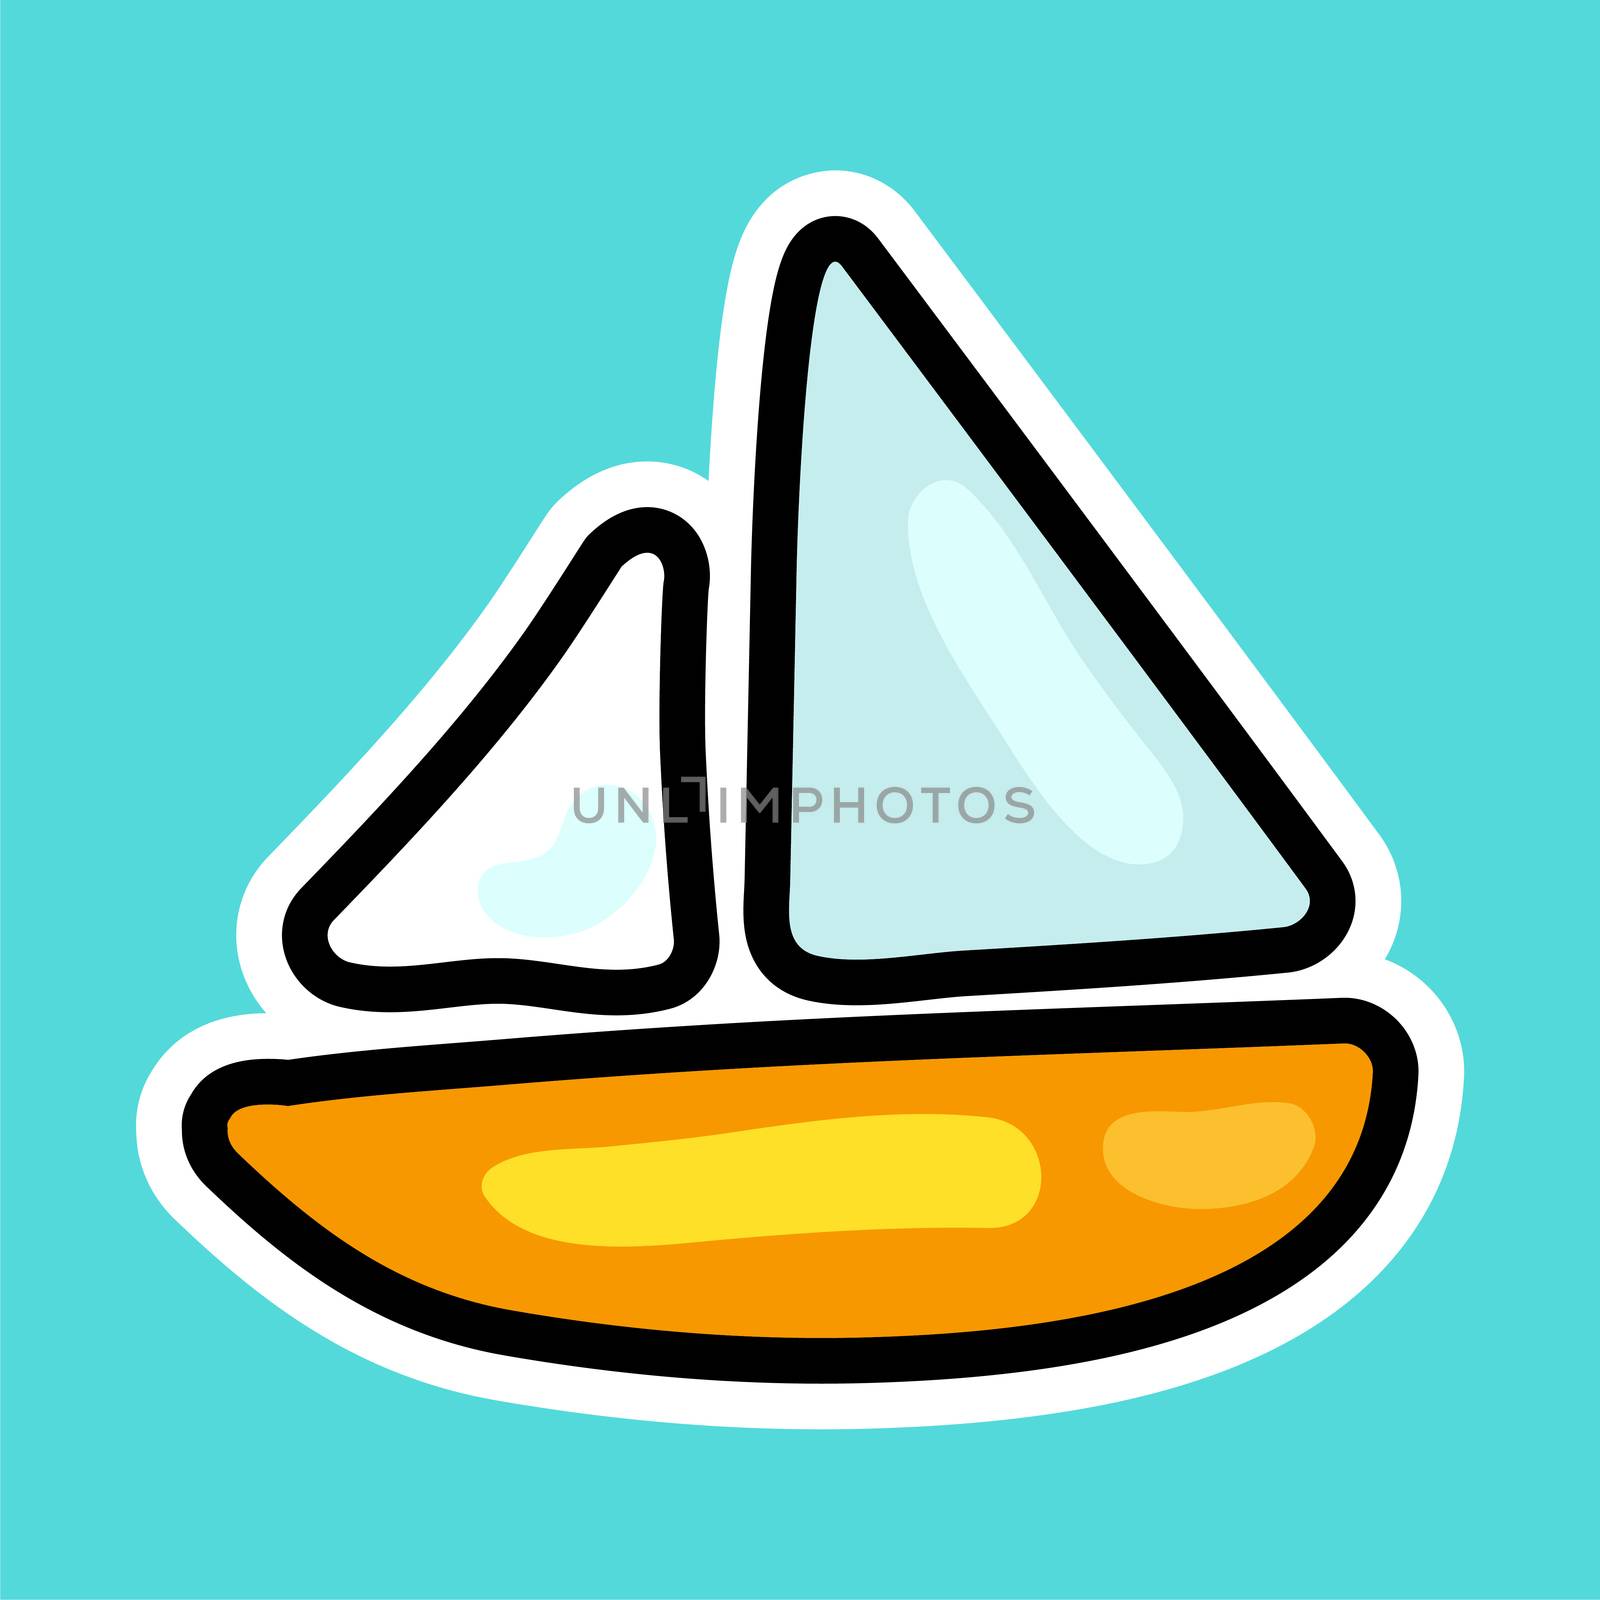 Vector ship or boat in cartoon style. Isolated icon of ship in sea or ocean with background